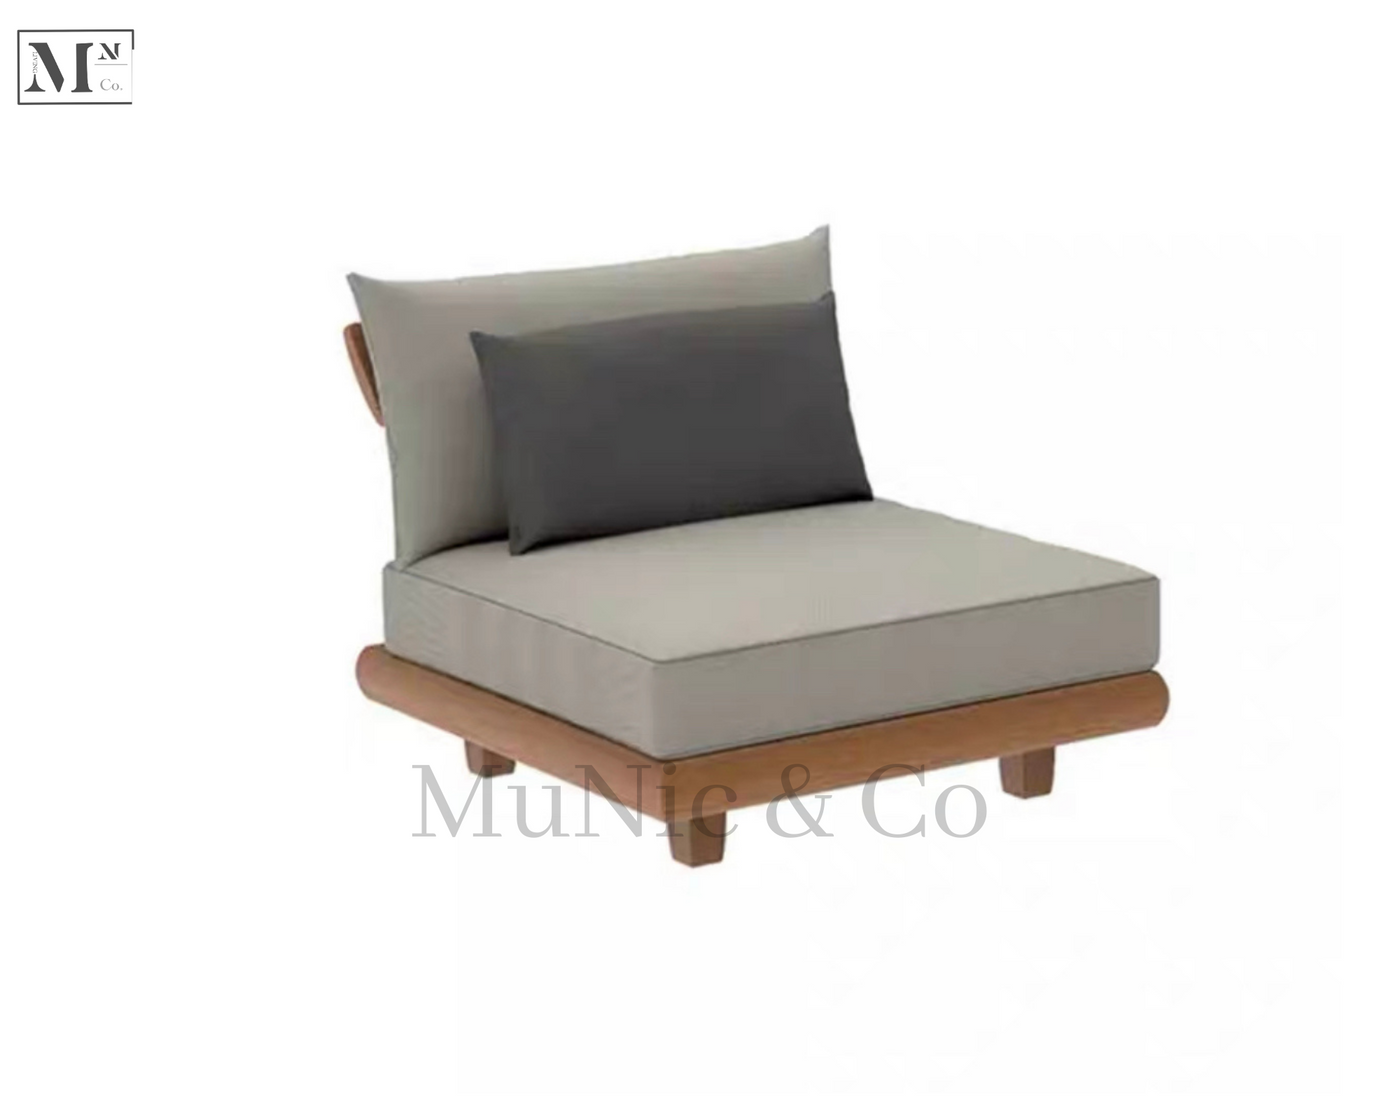 LILYDALE Indoor and Outdoor Wooden Sofa Customisable Sofa